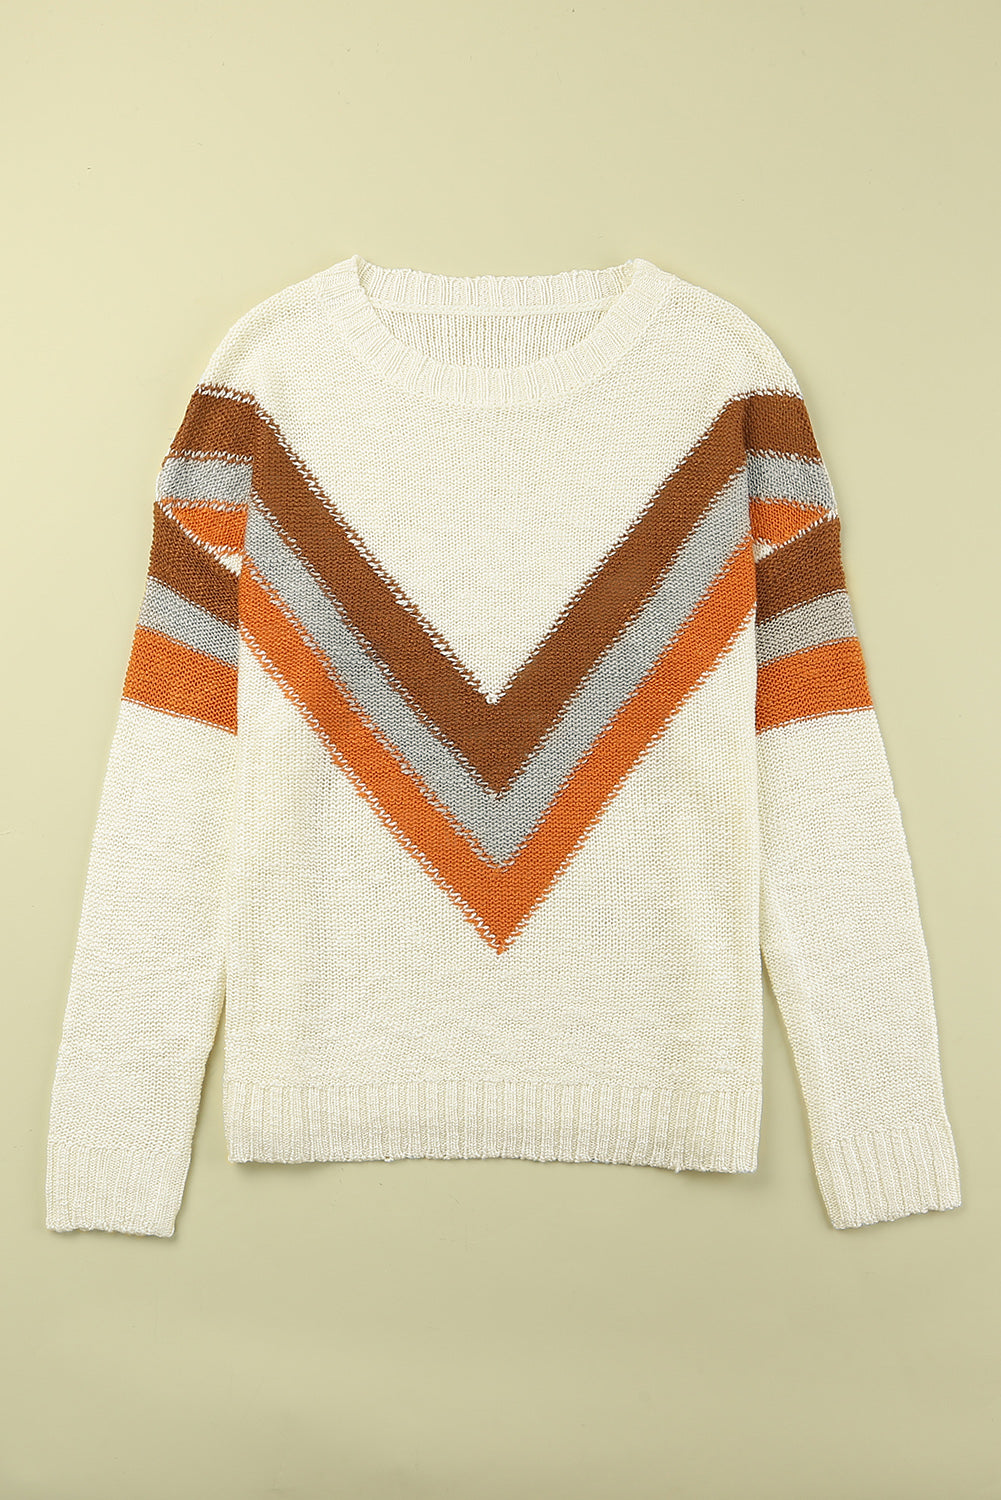 The802Gypsy  sweaters TRAVELING GYPSY-Chevron Striped Sweater